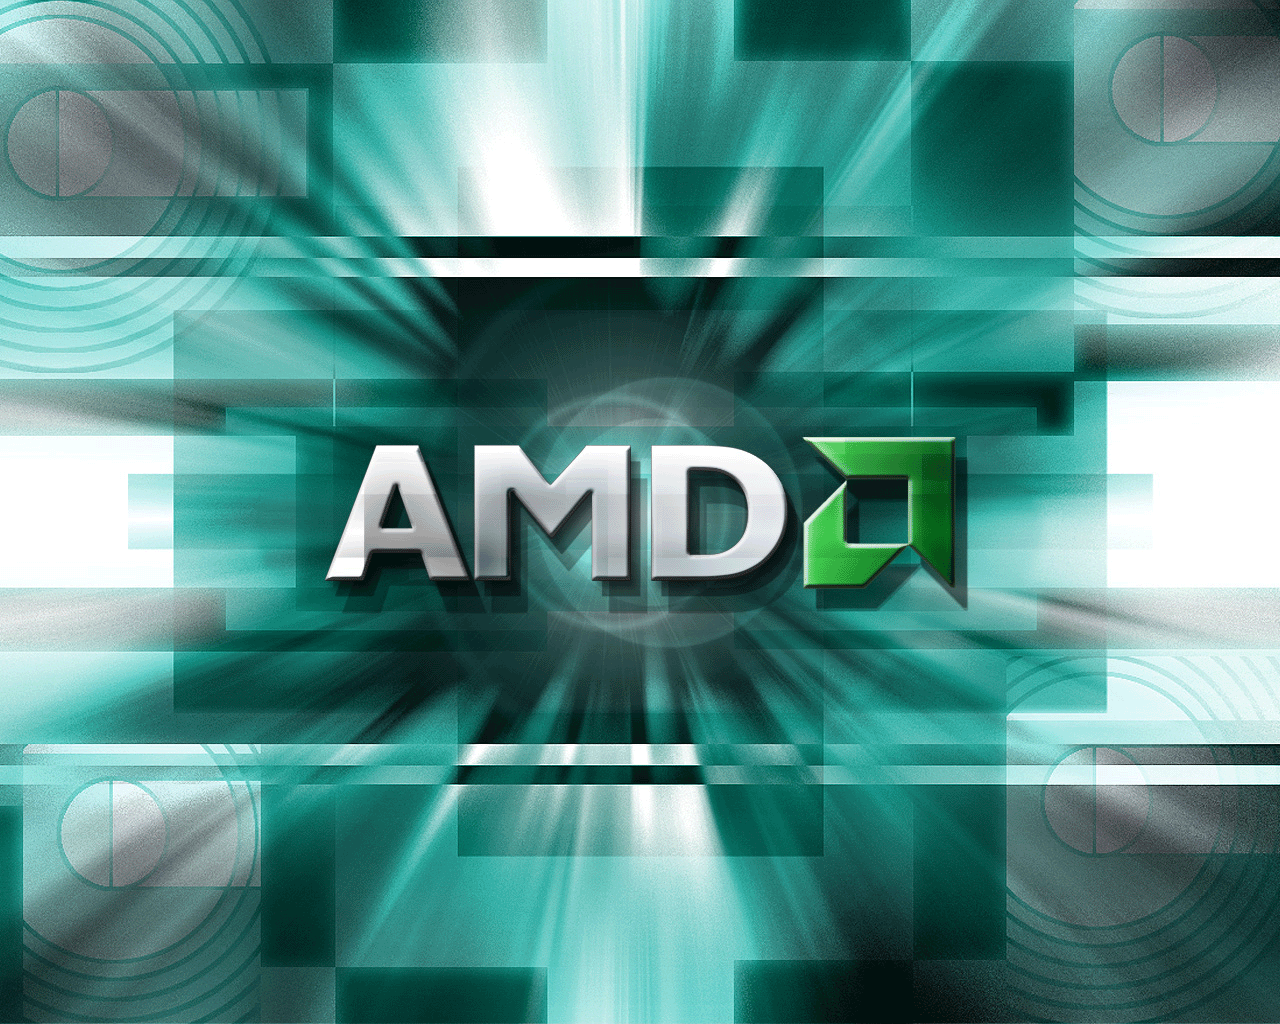 How Successful AMD in Building Game Console Monopoly?